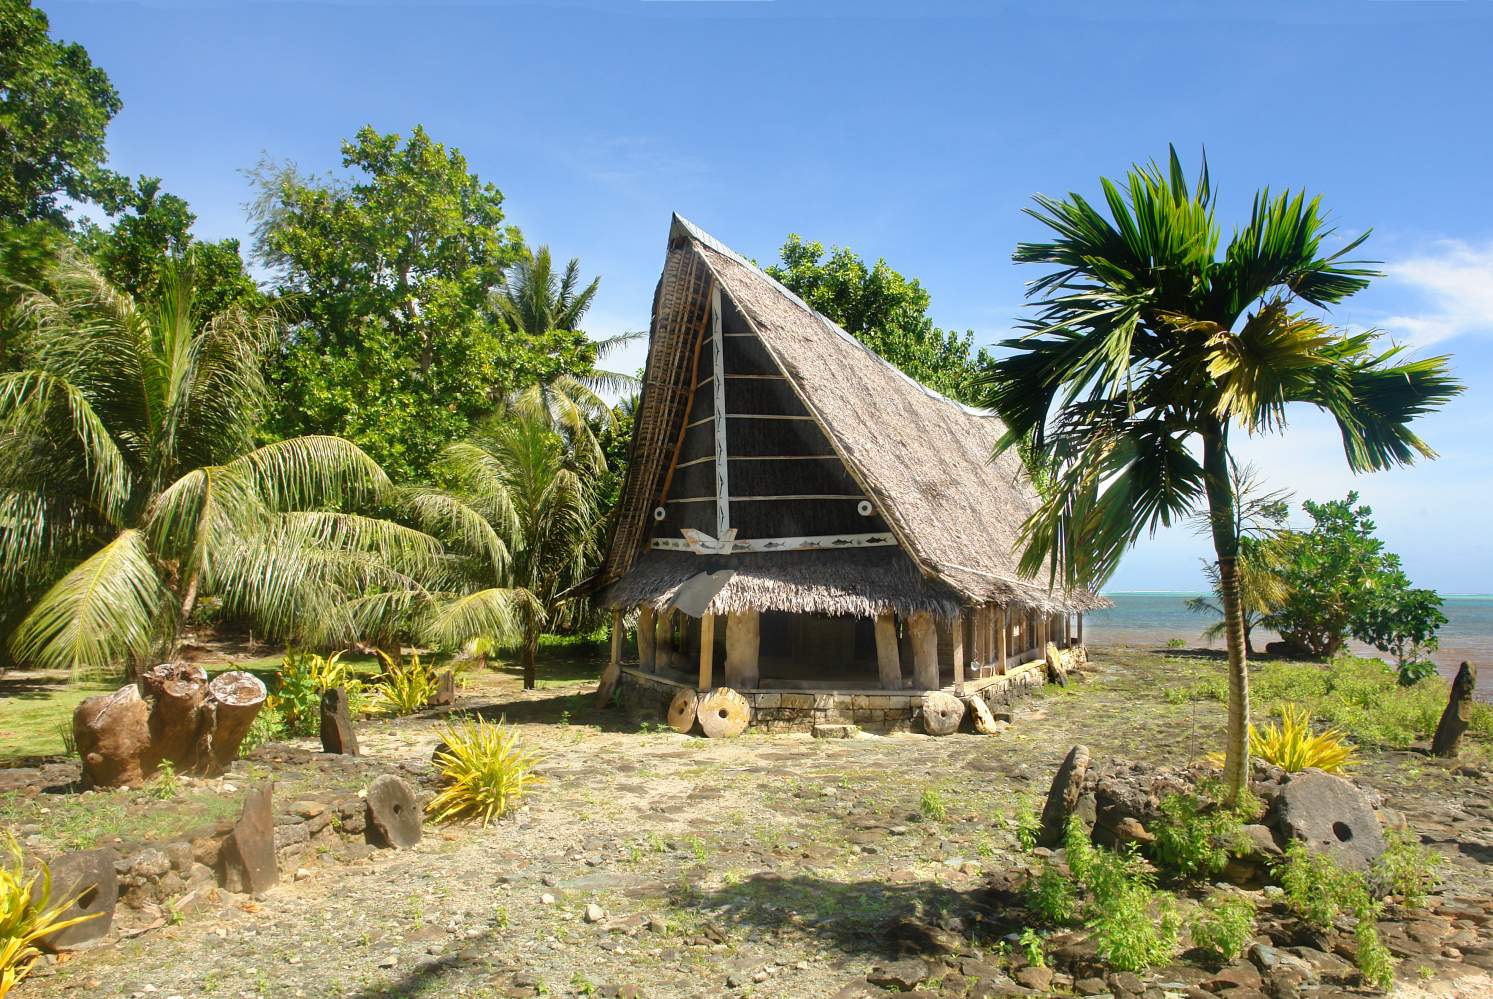 The Ngariy Men's Meetinghouse known as a faluw on Yap island, Micronesia